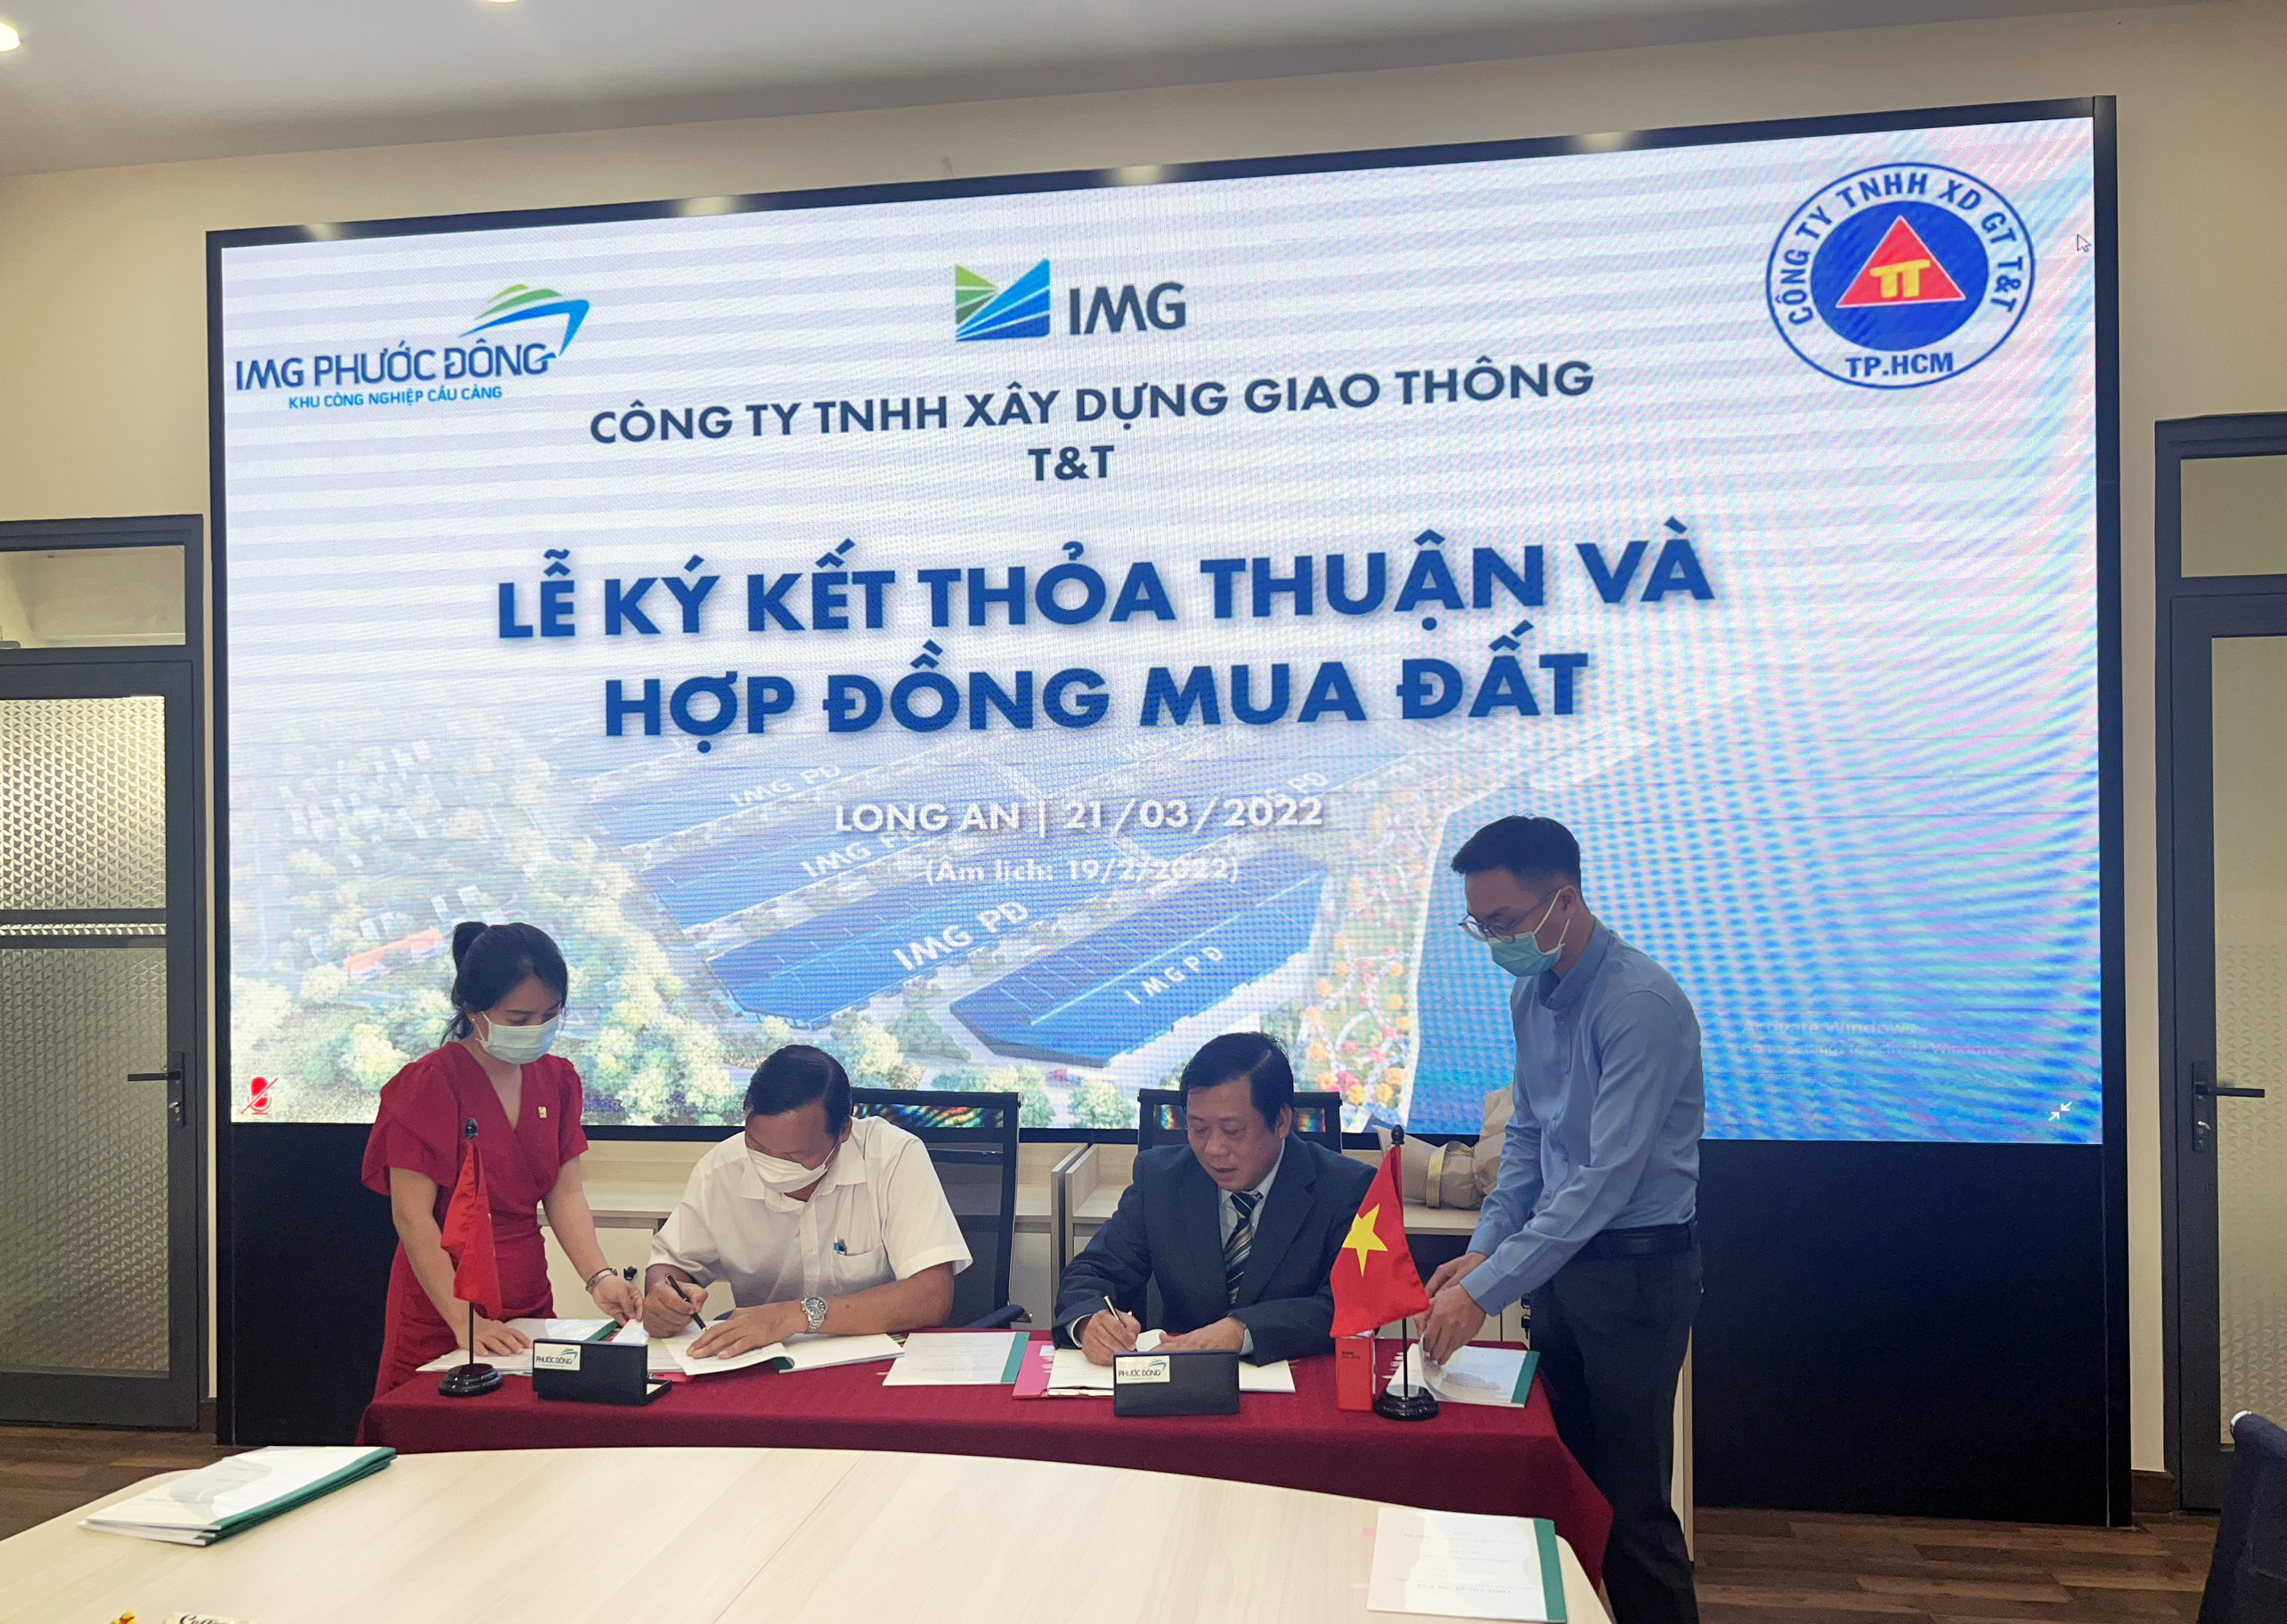 signing ceremony of agreement   land lease contract between img phuoc dong joint stock company and t t traffic construction company